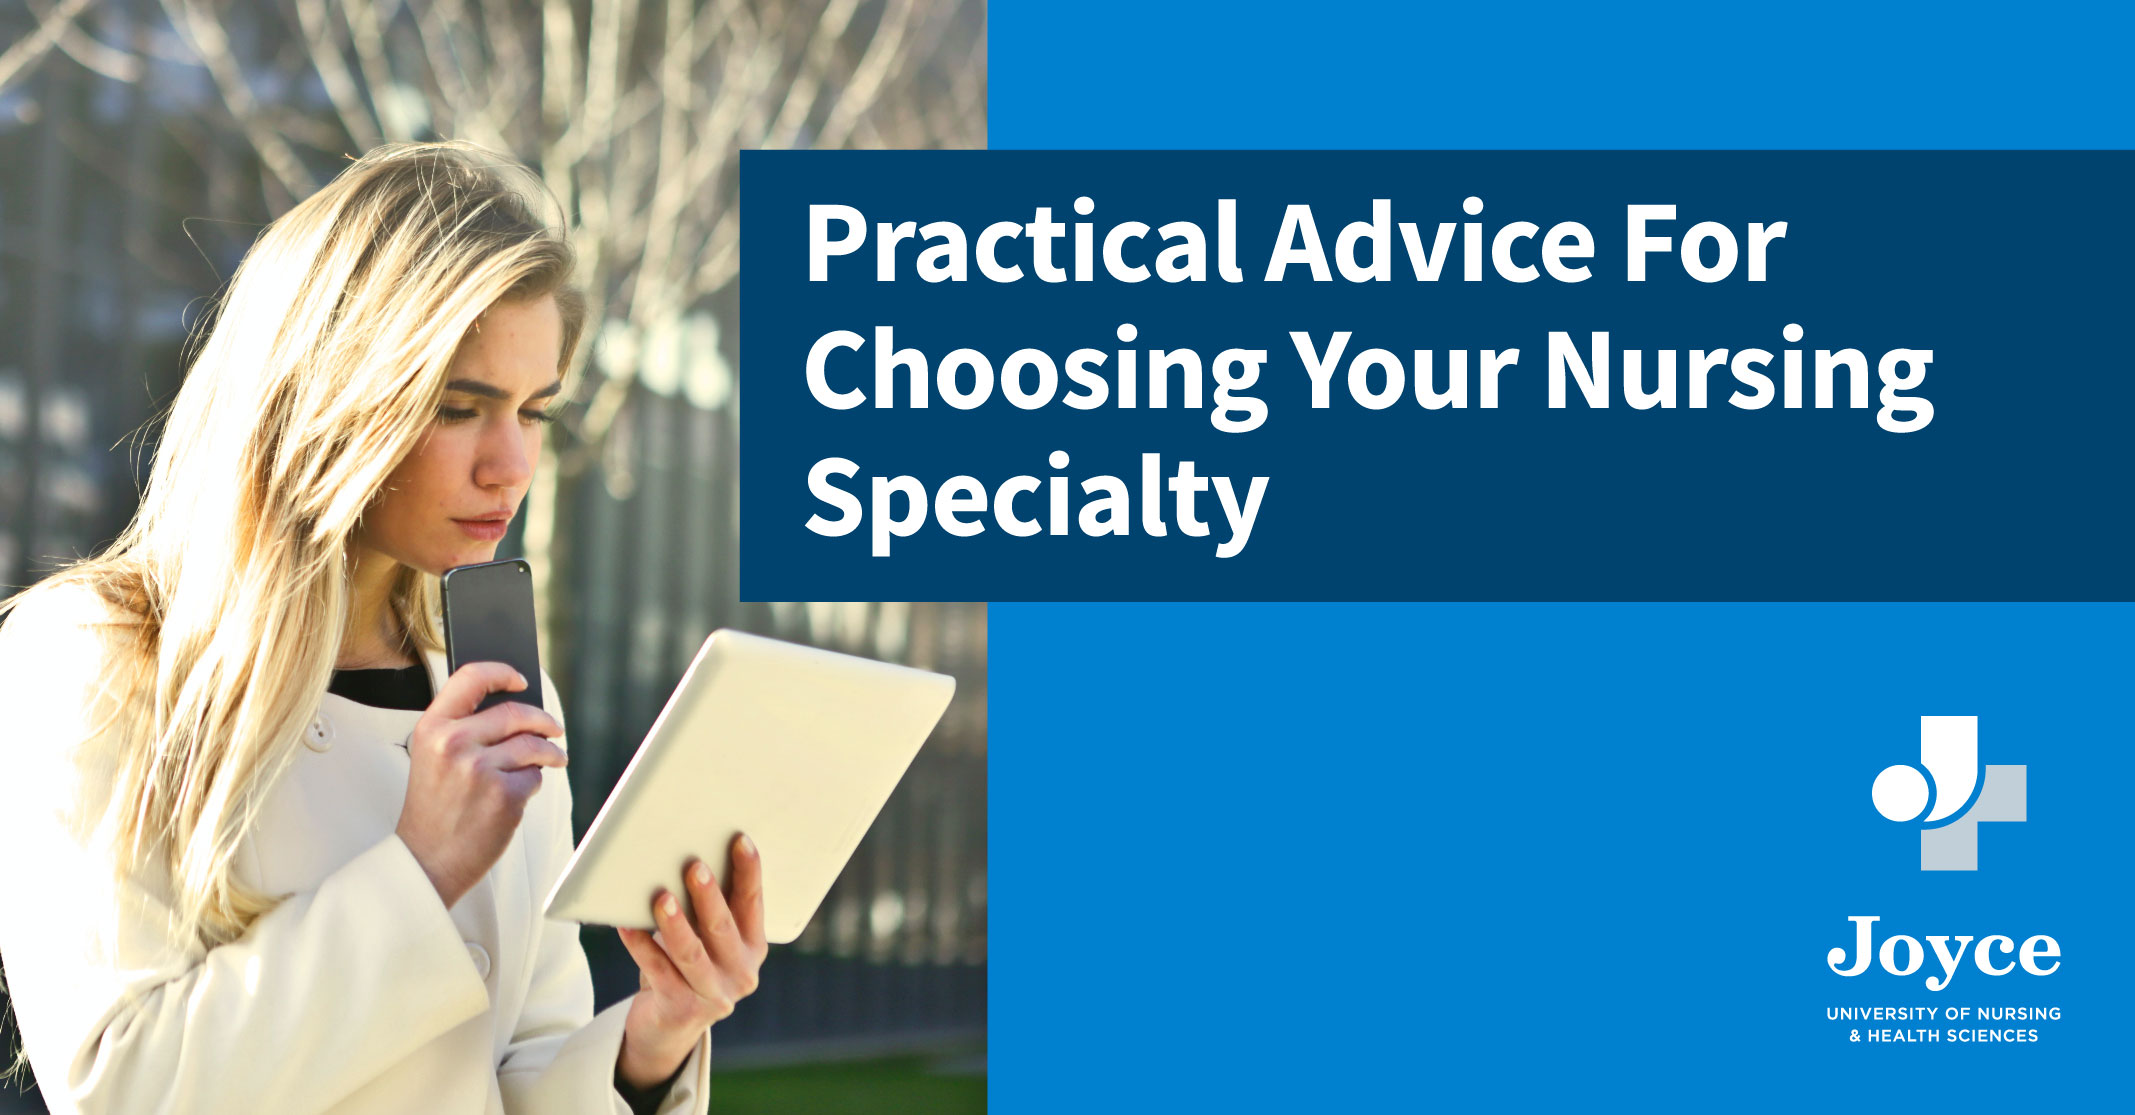 Practical Advice for Choosing Your Nursing Specialty